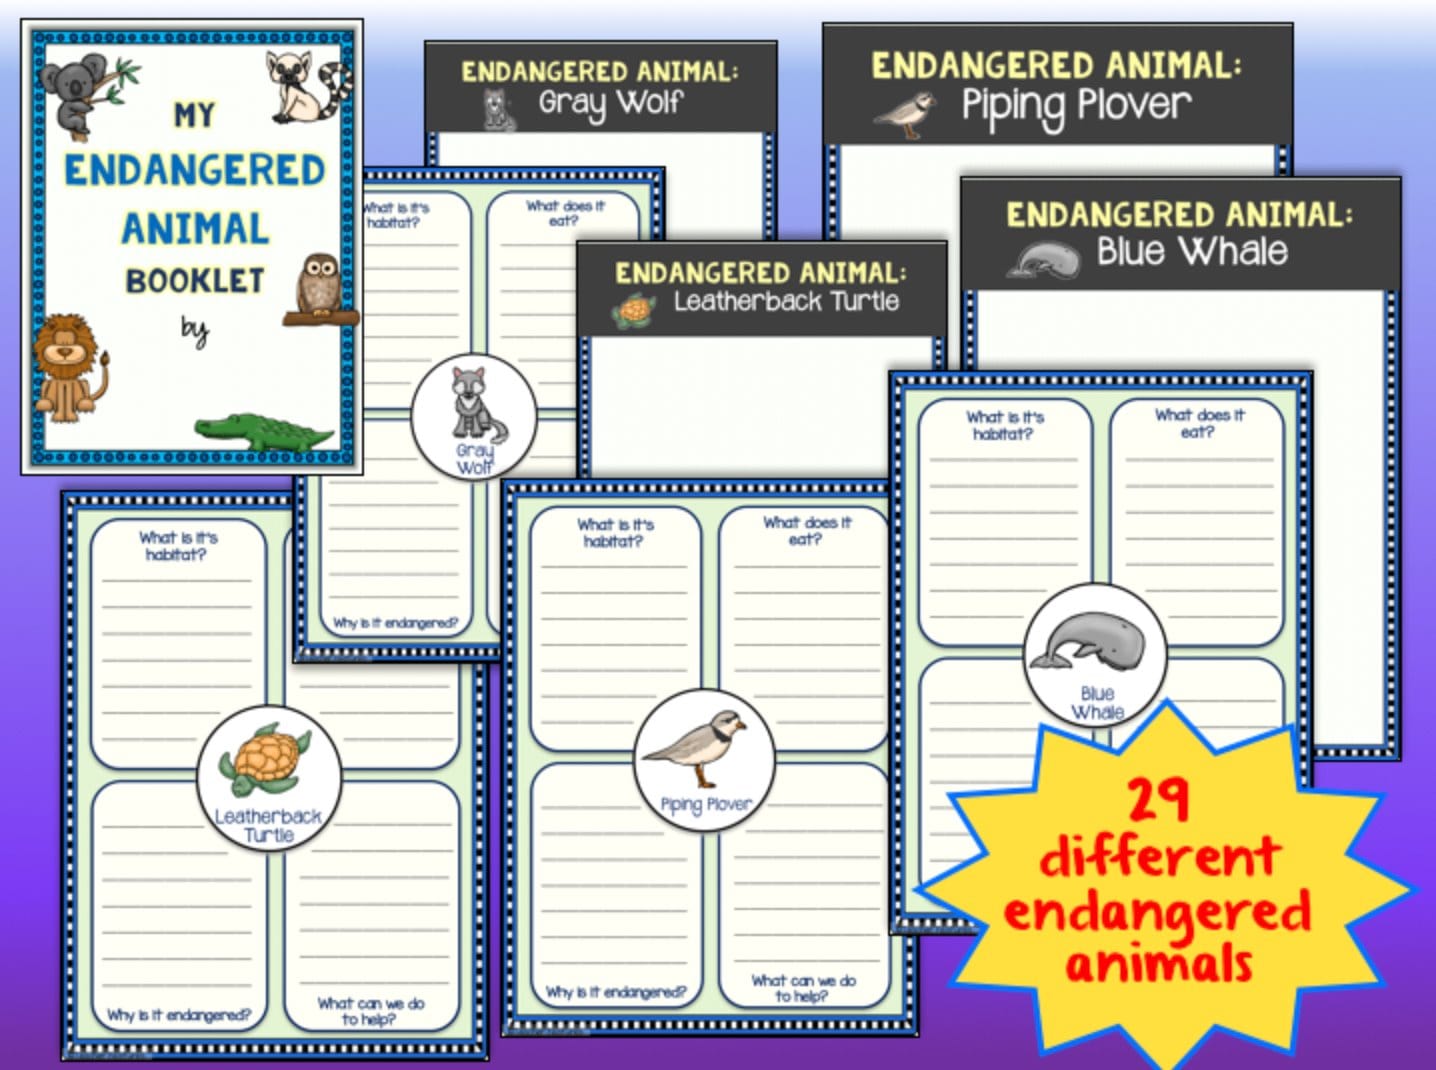 Google Slides ENDANGERED ANIMAL REPORTS Research Writing Project Digital Download Teacher Features